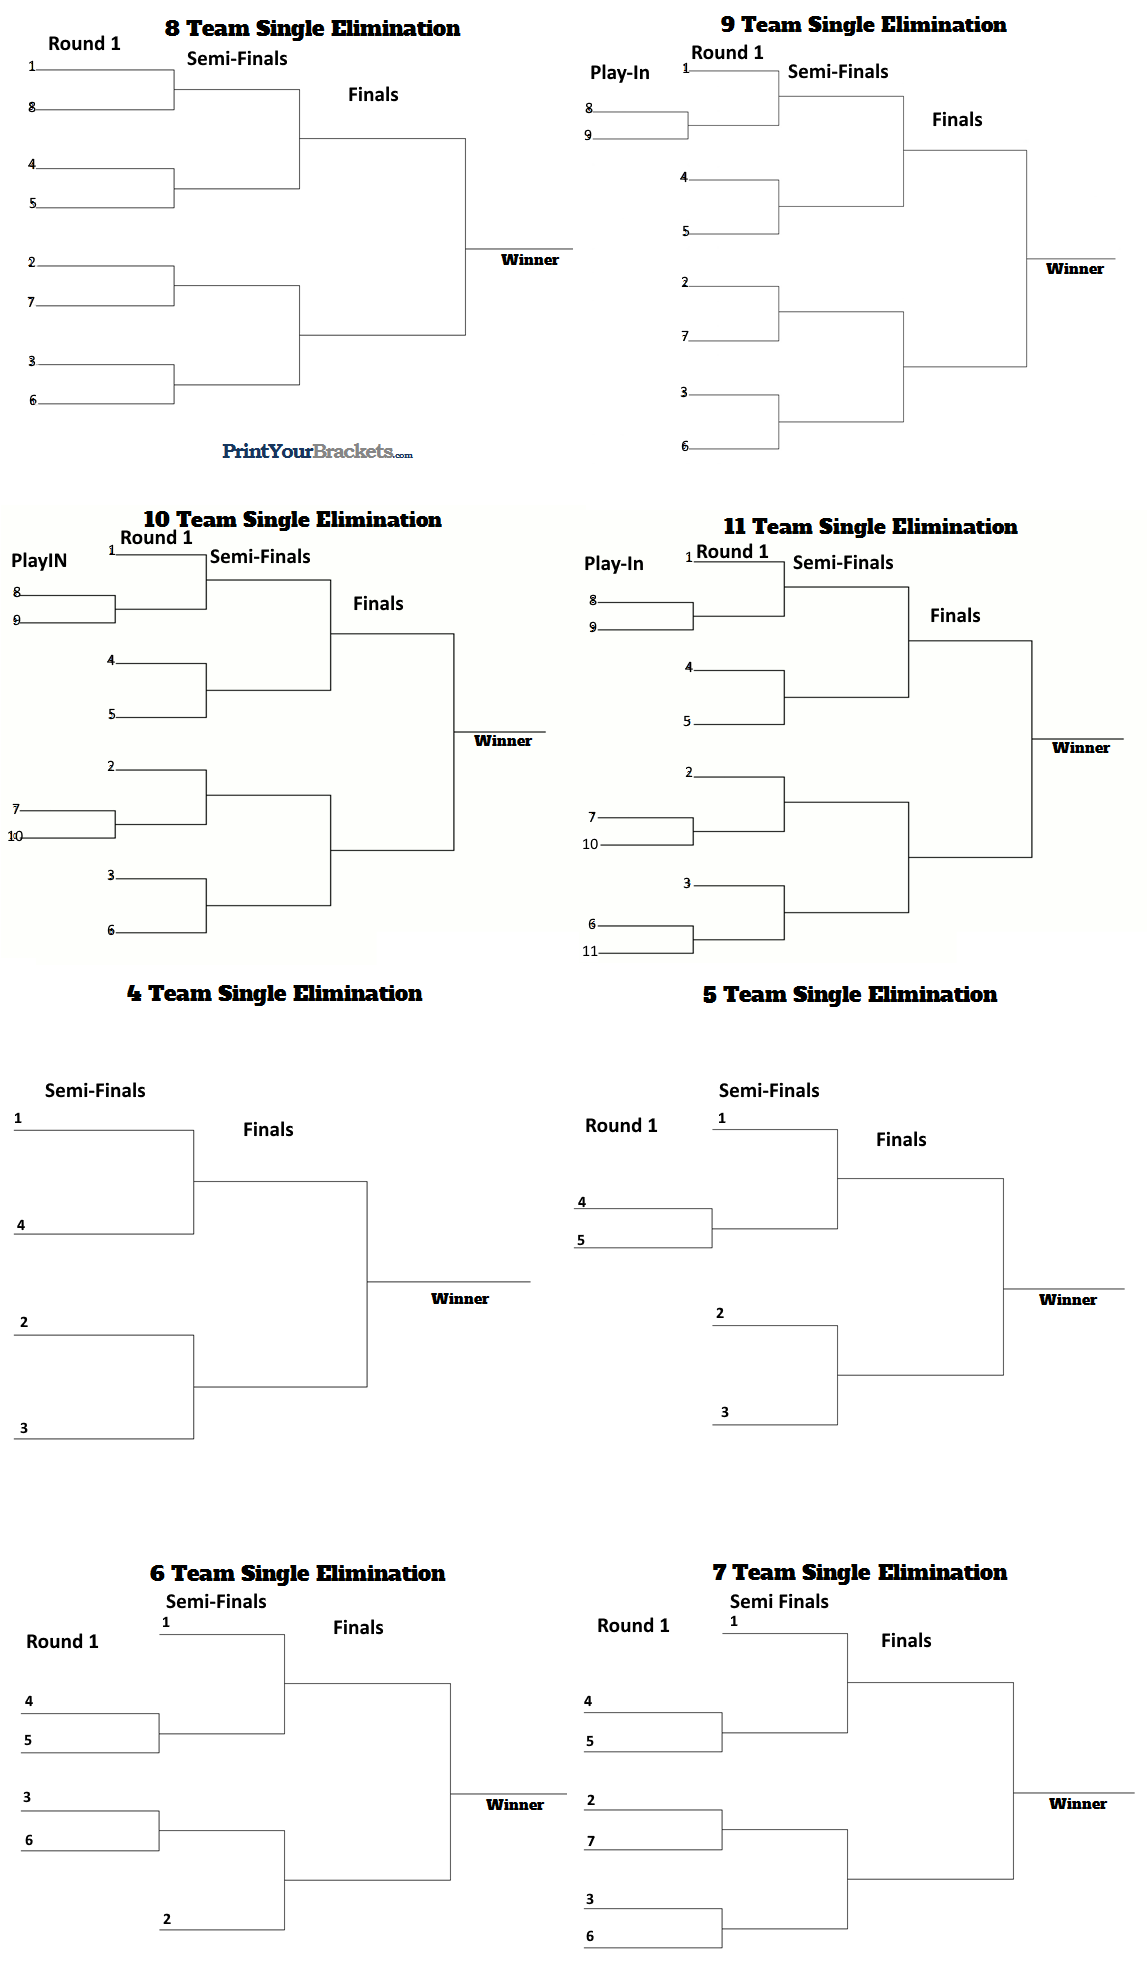 Single Elimination Seeded Tournament Brackets 4 to 11